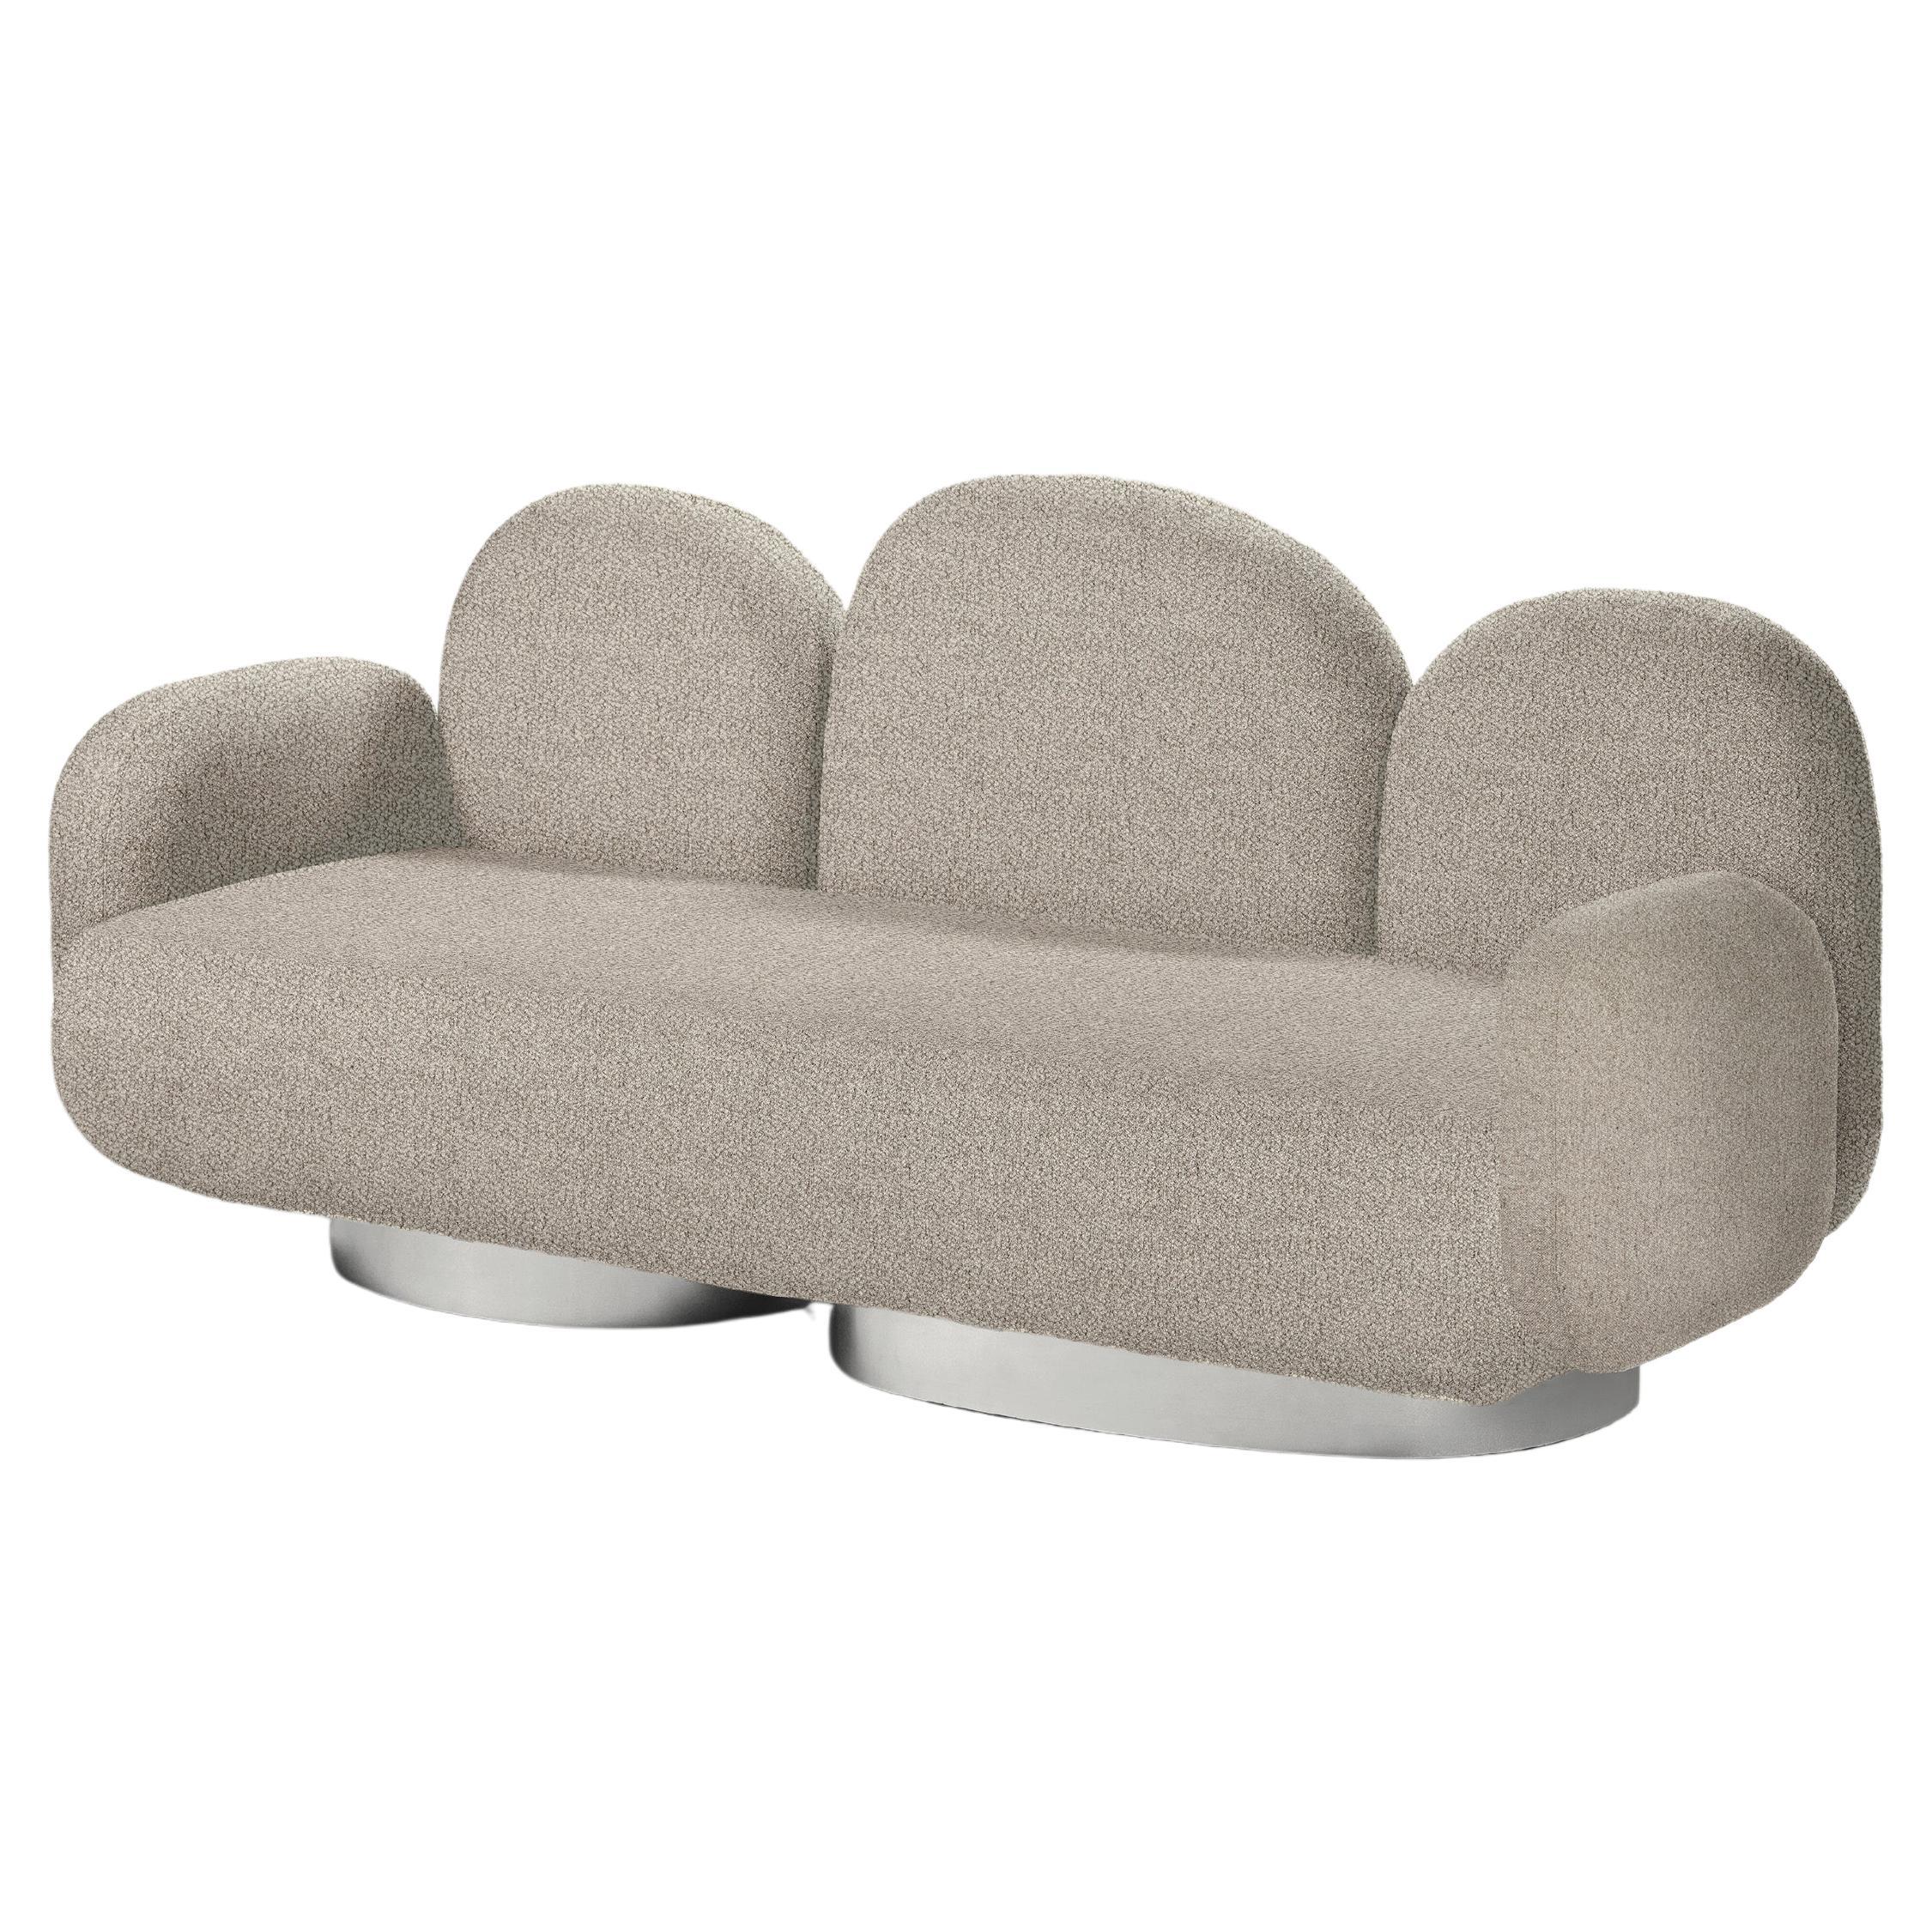 Contemporary Sofa 'Assemble' by Destroyers/Builders, 2 seaters + 2 armrests